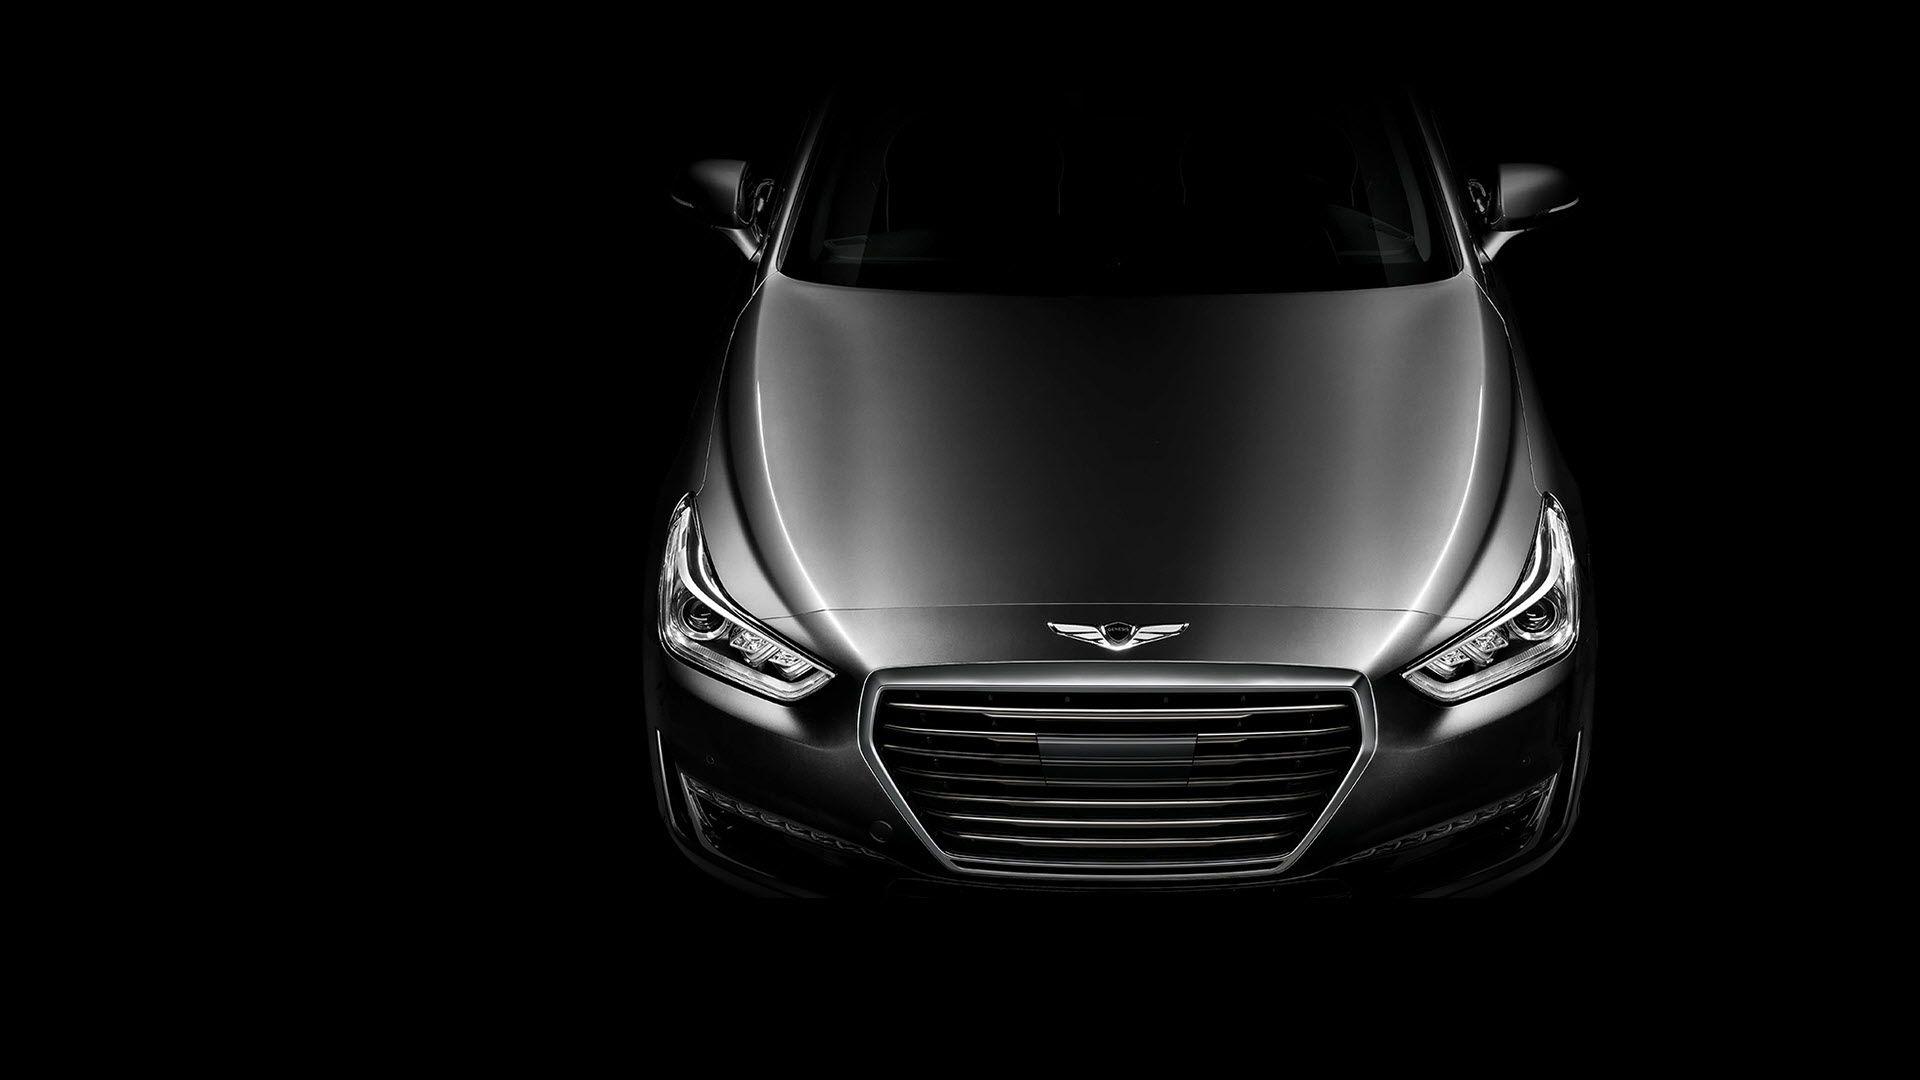 Build your own Genesis G90. Select model colors and specs